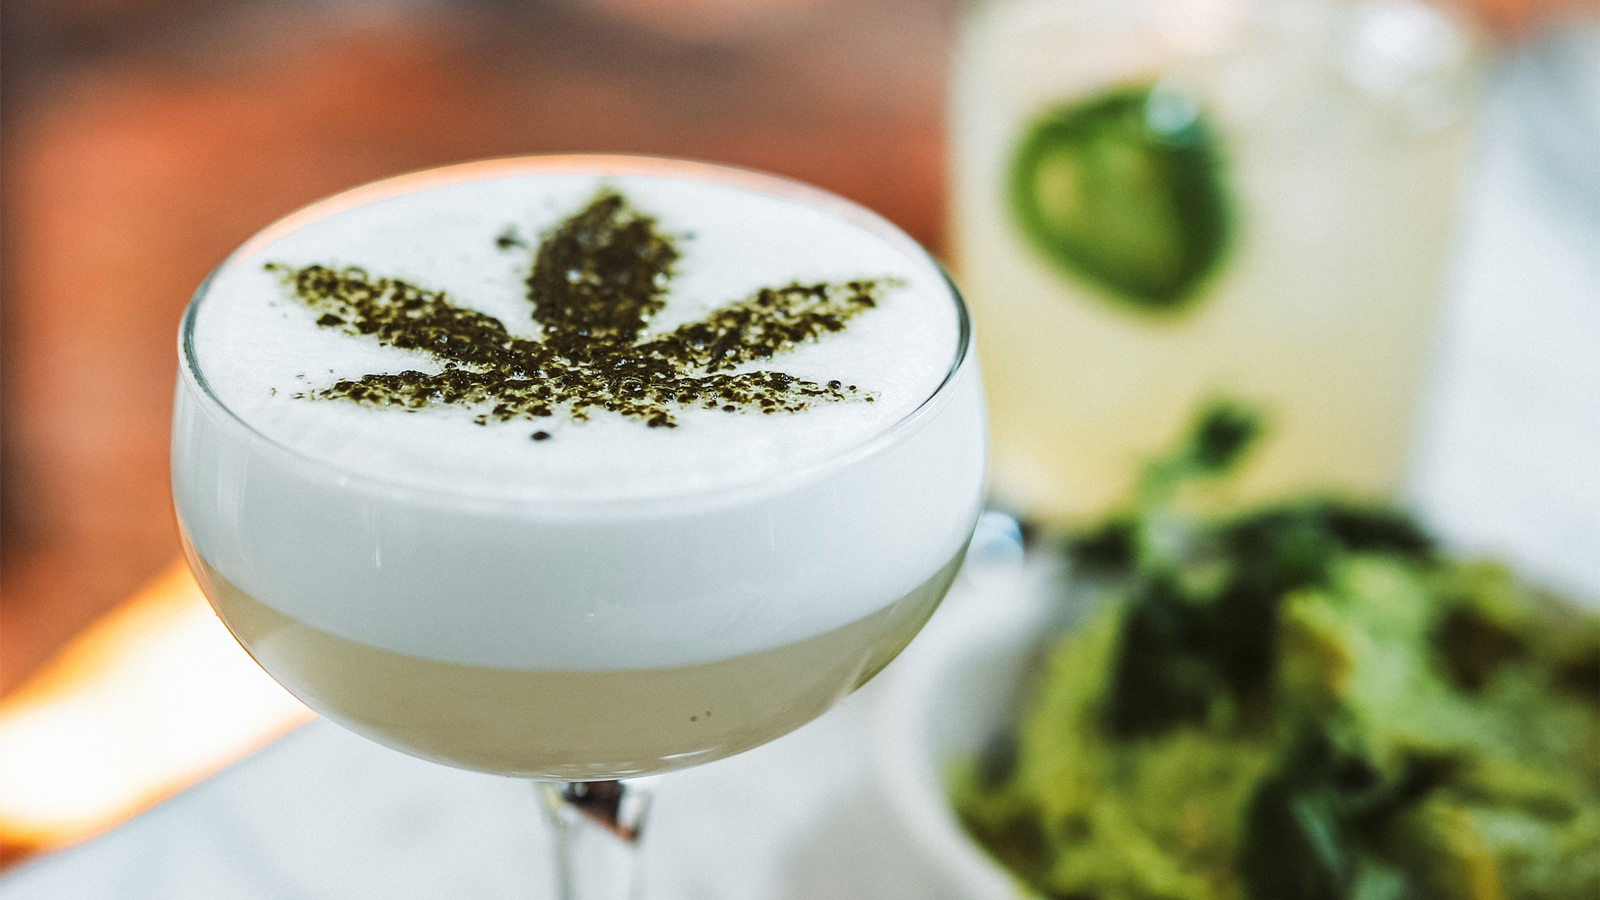 A refreshing drink with minced herbs sprinkled on top in the shape of a marijuana leaf.